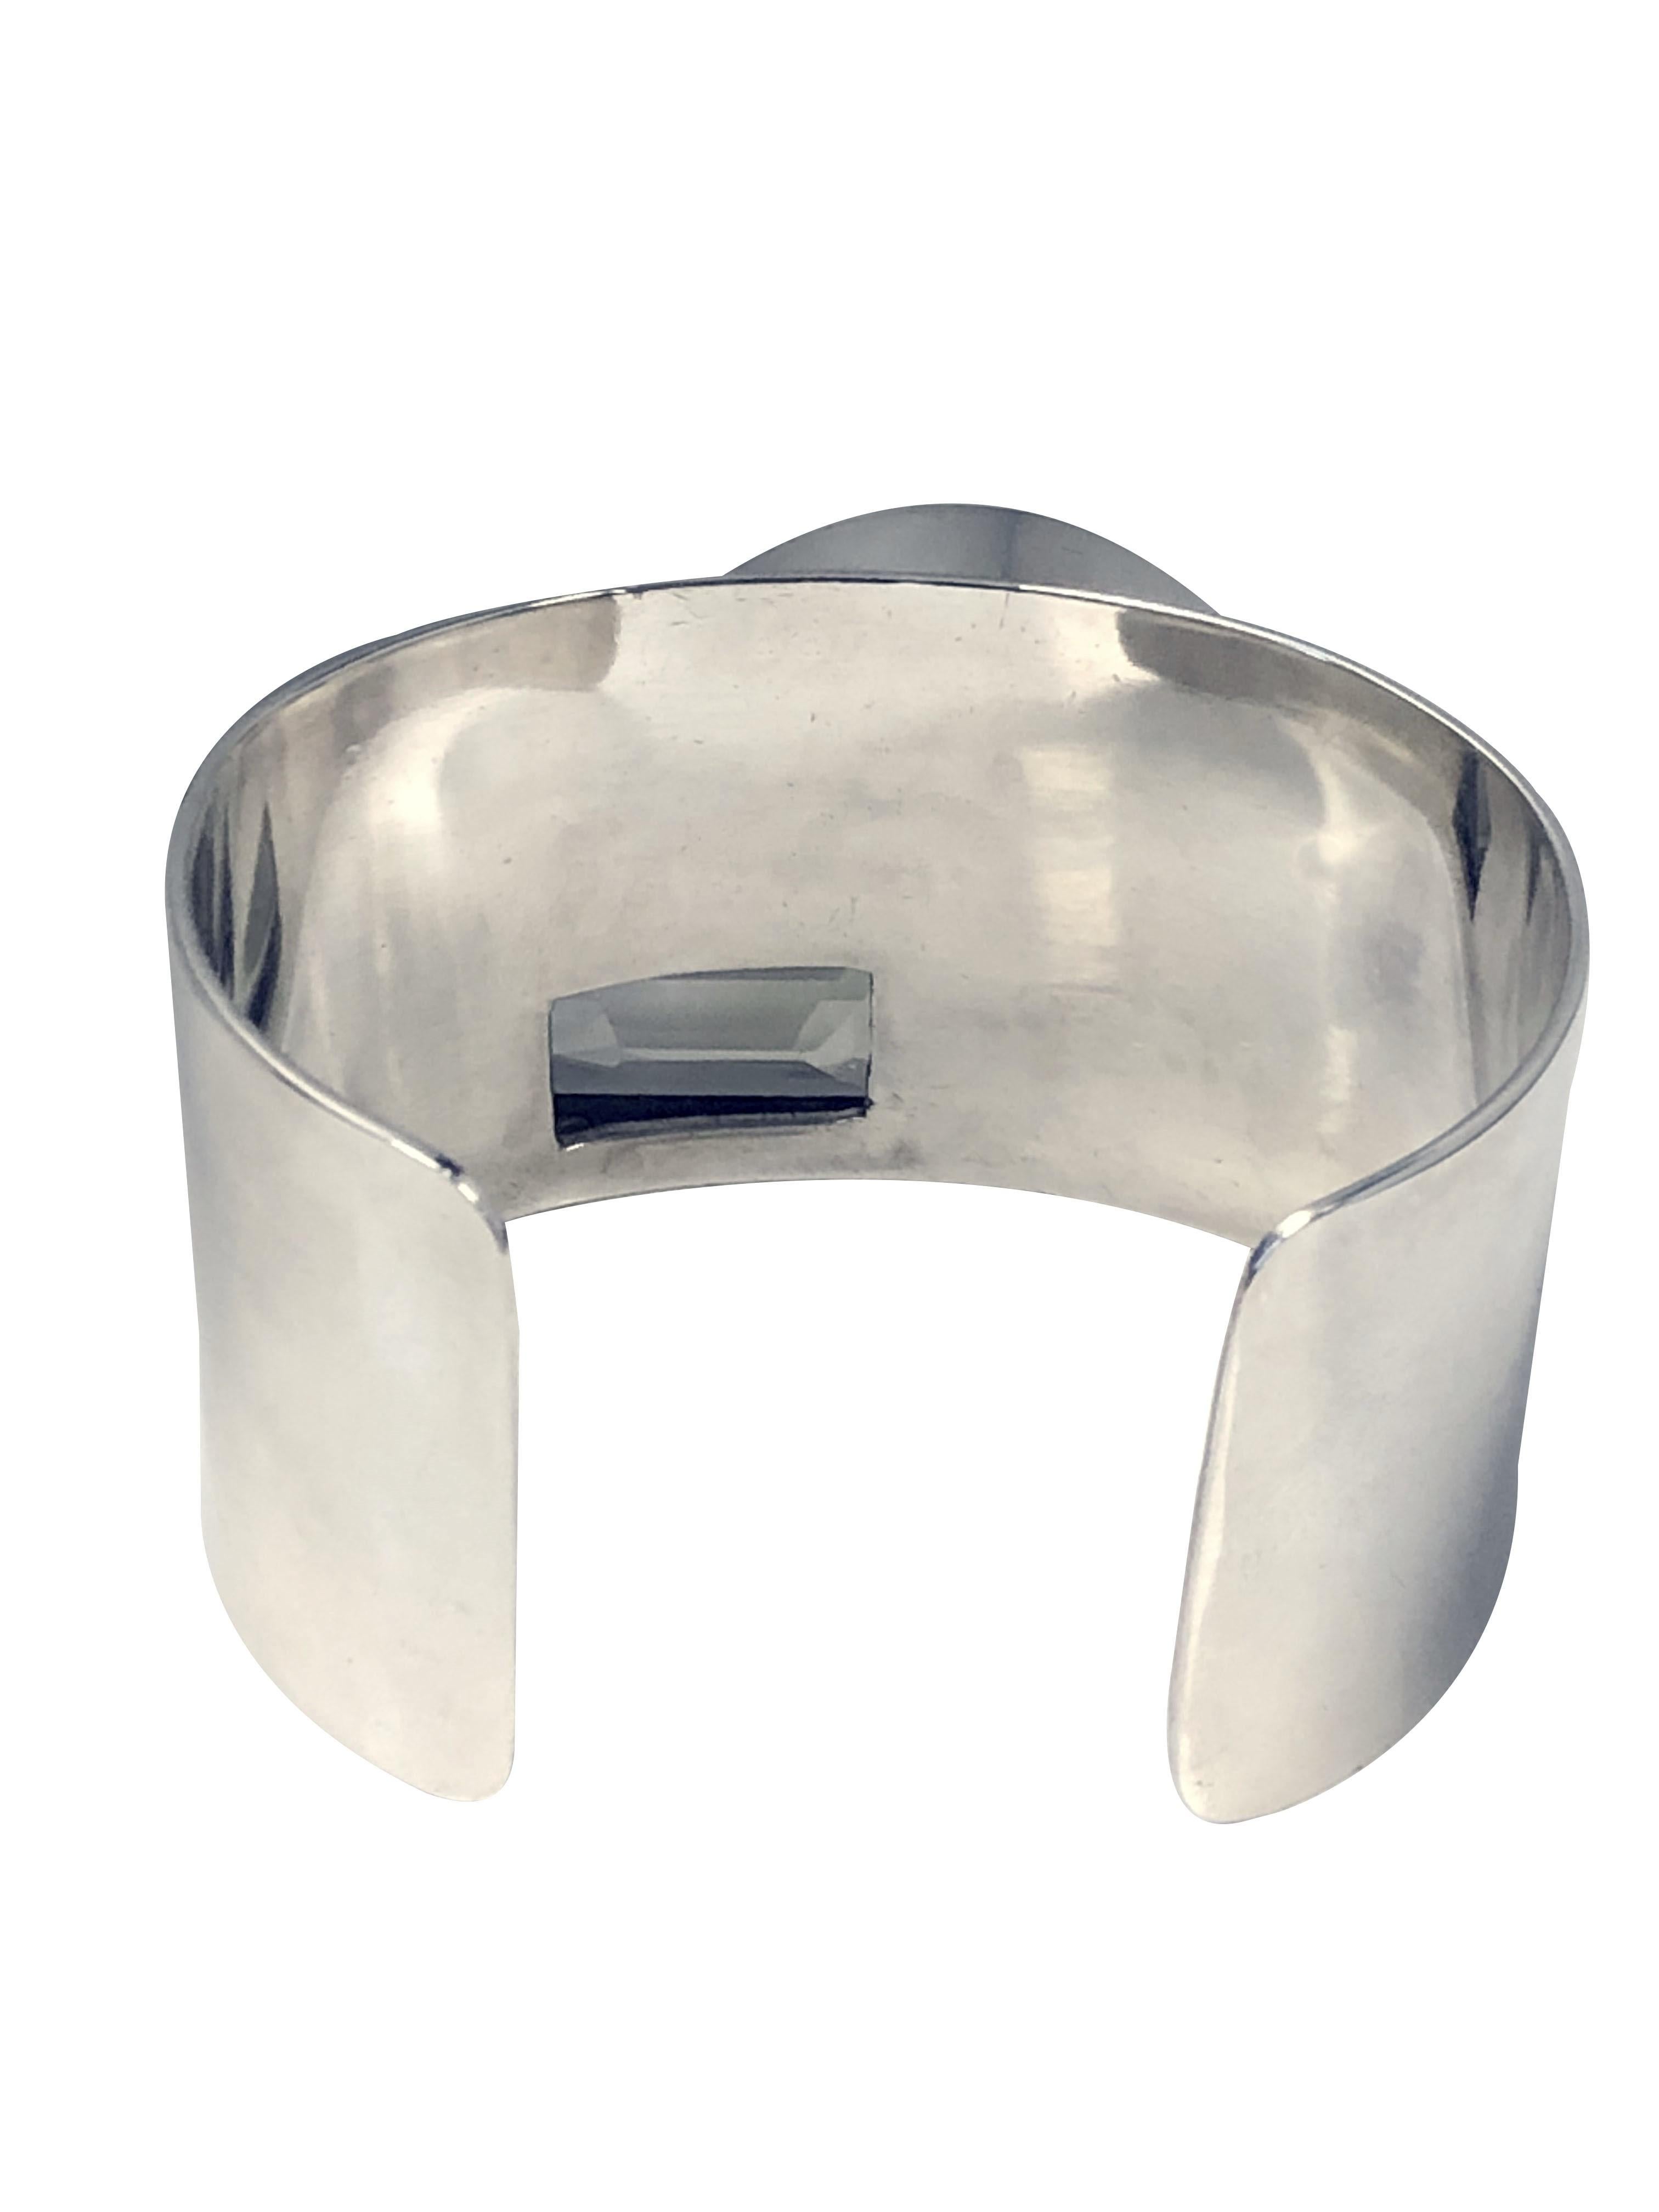 Circa 1980 M&J Savitt Mid Century Modern Style Sterling Silver Cuff Bracelet,  measuring 1 3/8 inches wide, 2 inches across the top and set with a step cut light Yellow Citrine. Nice Solid Gage Silver construction, Inside measurement of 6 1/2 inches